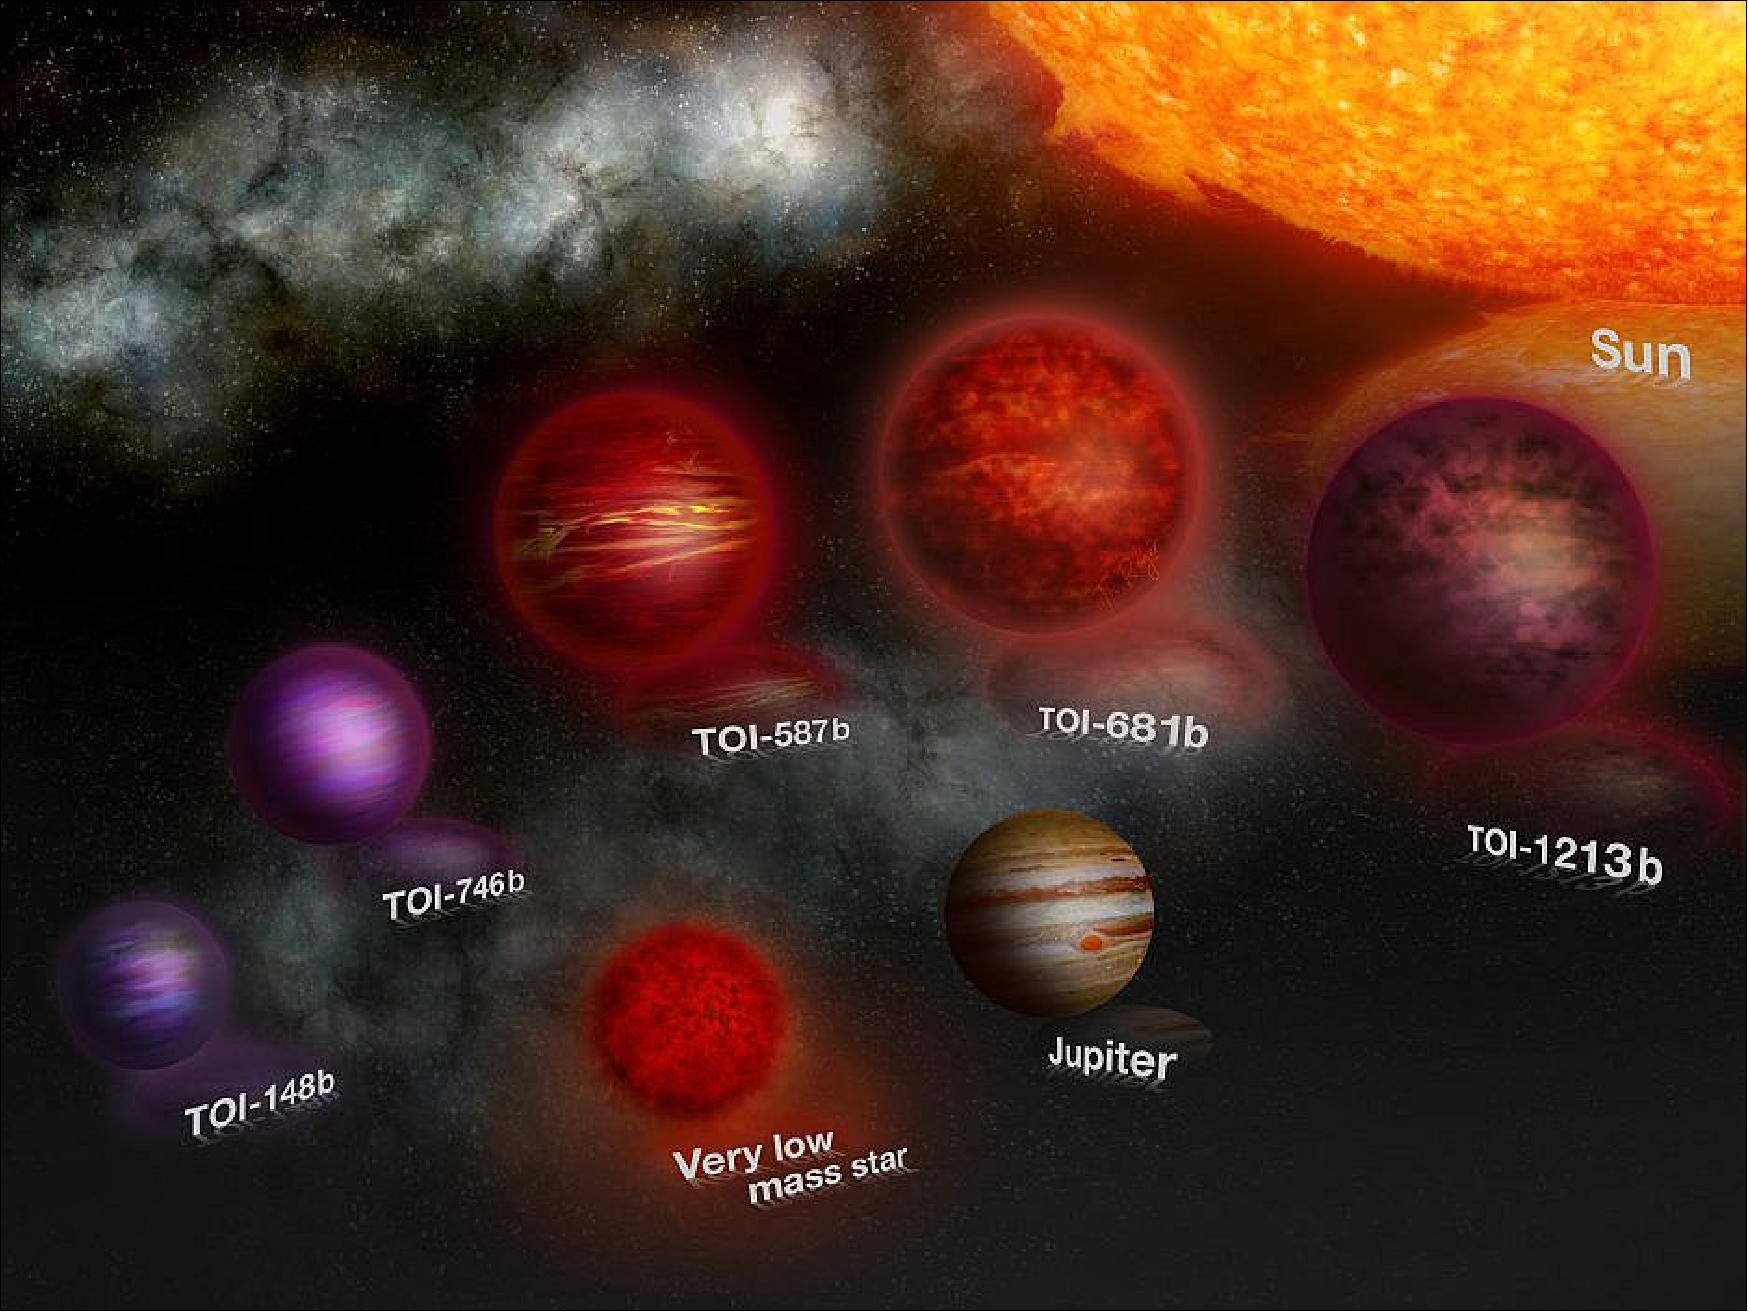 Figure 19: Artist’s illustration showing the five brown dwarfs (TOIs) as well as the Sun, Jupiter and a low mass star for reference (image credit: Thibaut Roger)